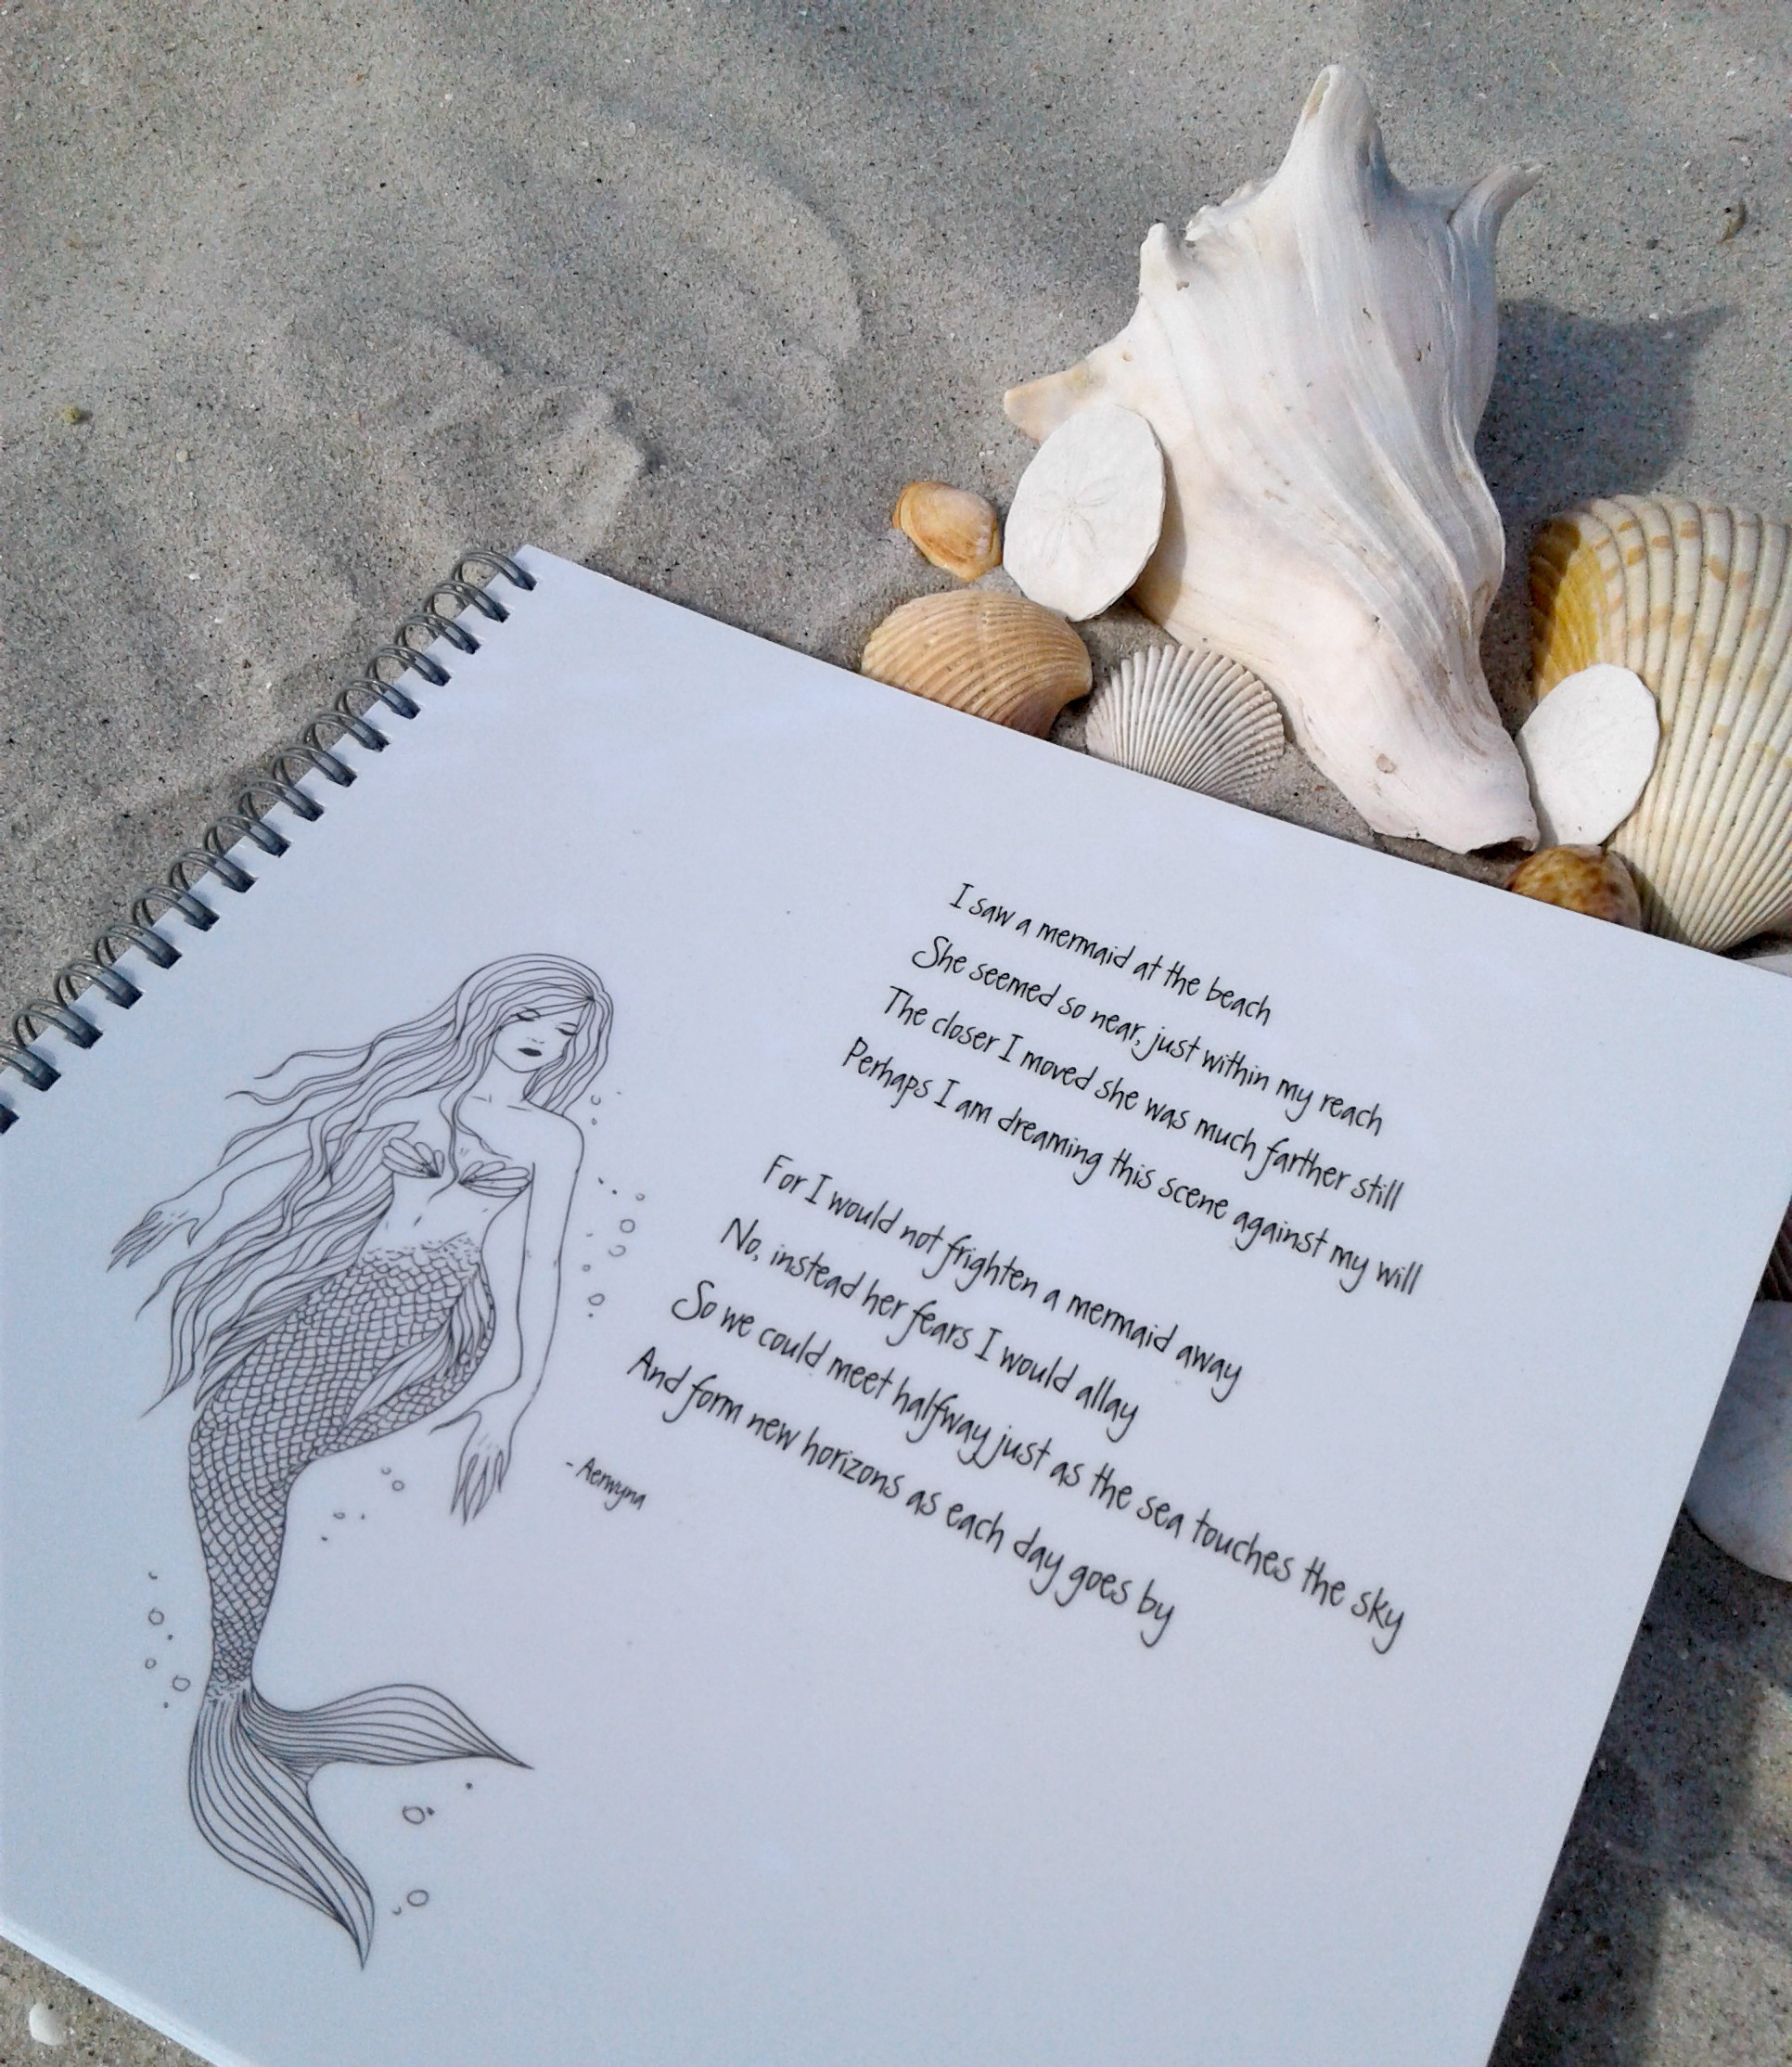 Notebook With Poem "I Saw A Mermaid At The Beach"